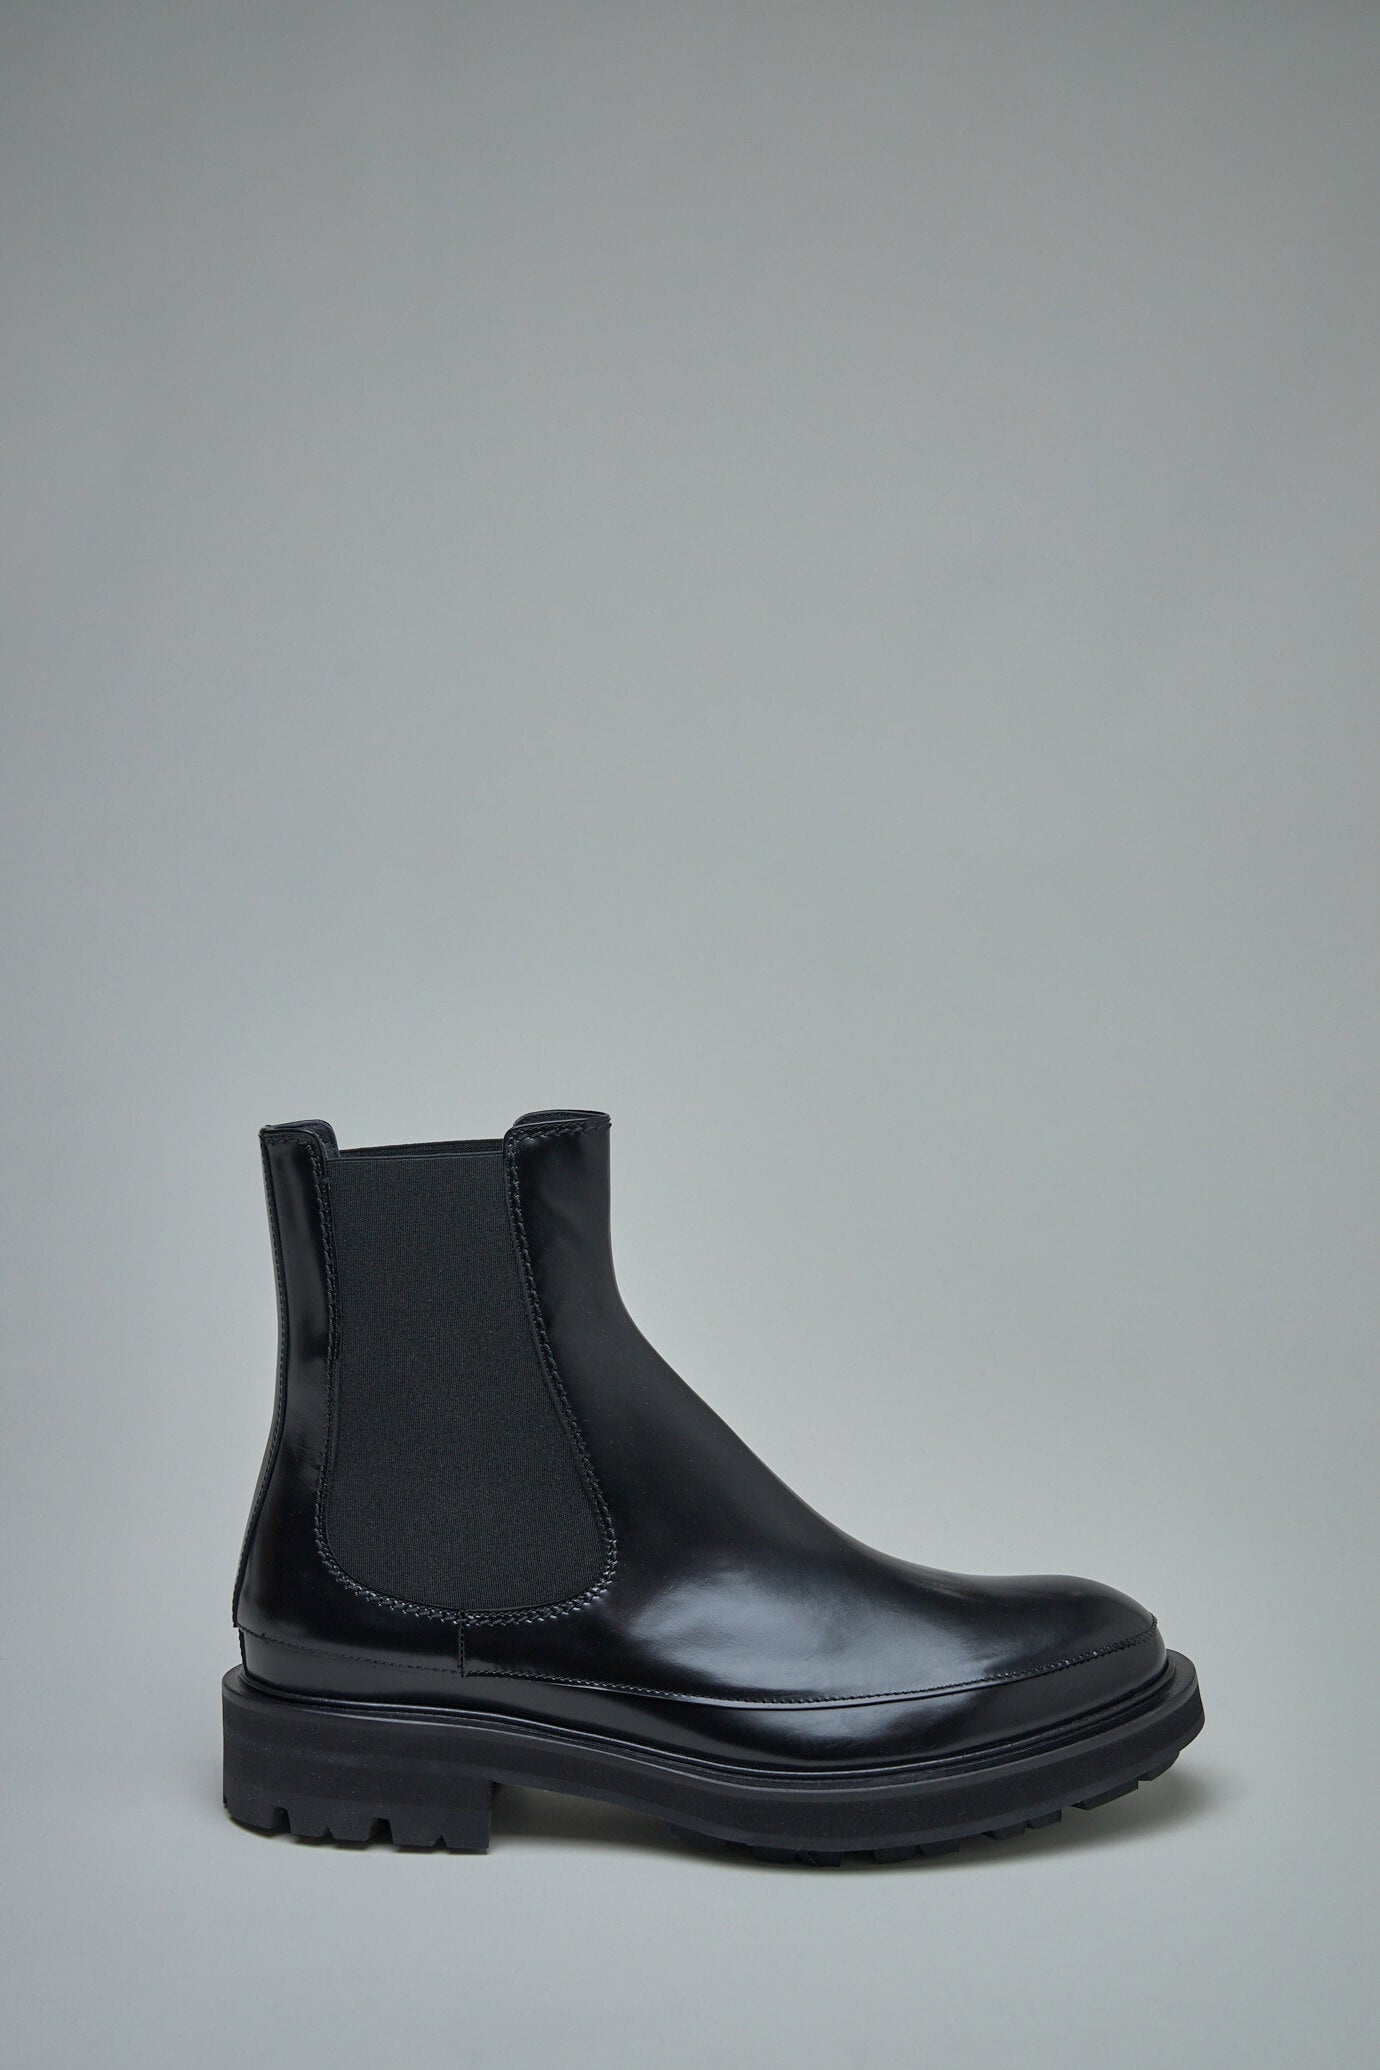 Leather Upper and Rubber Sole black